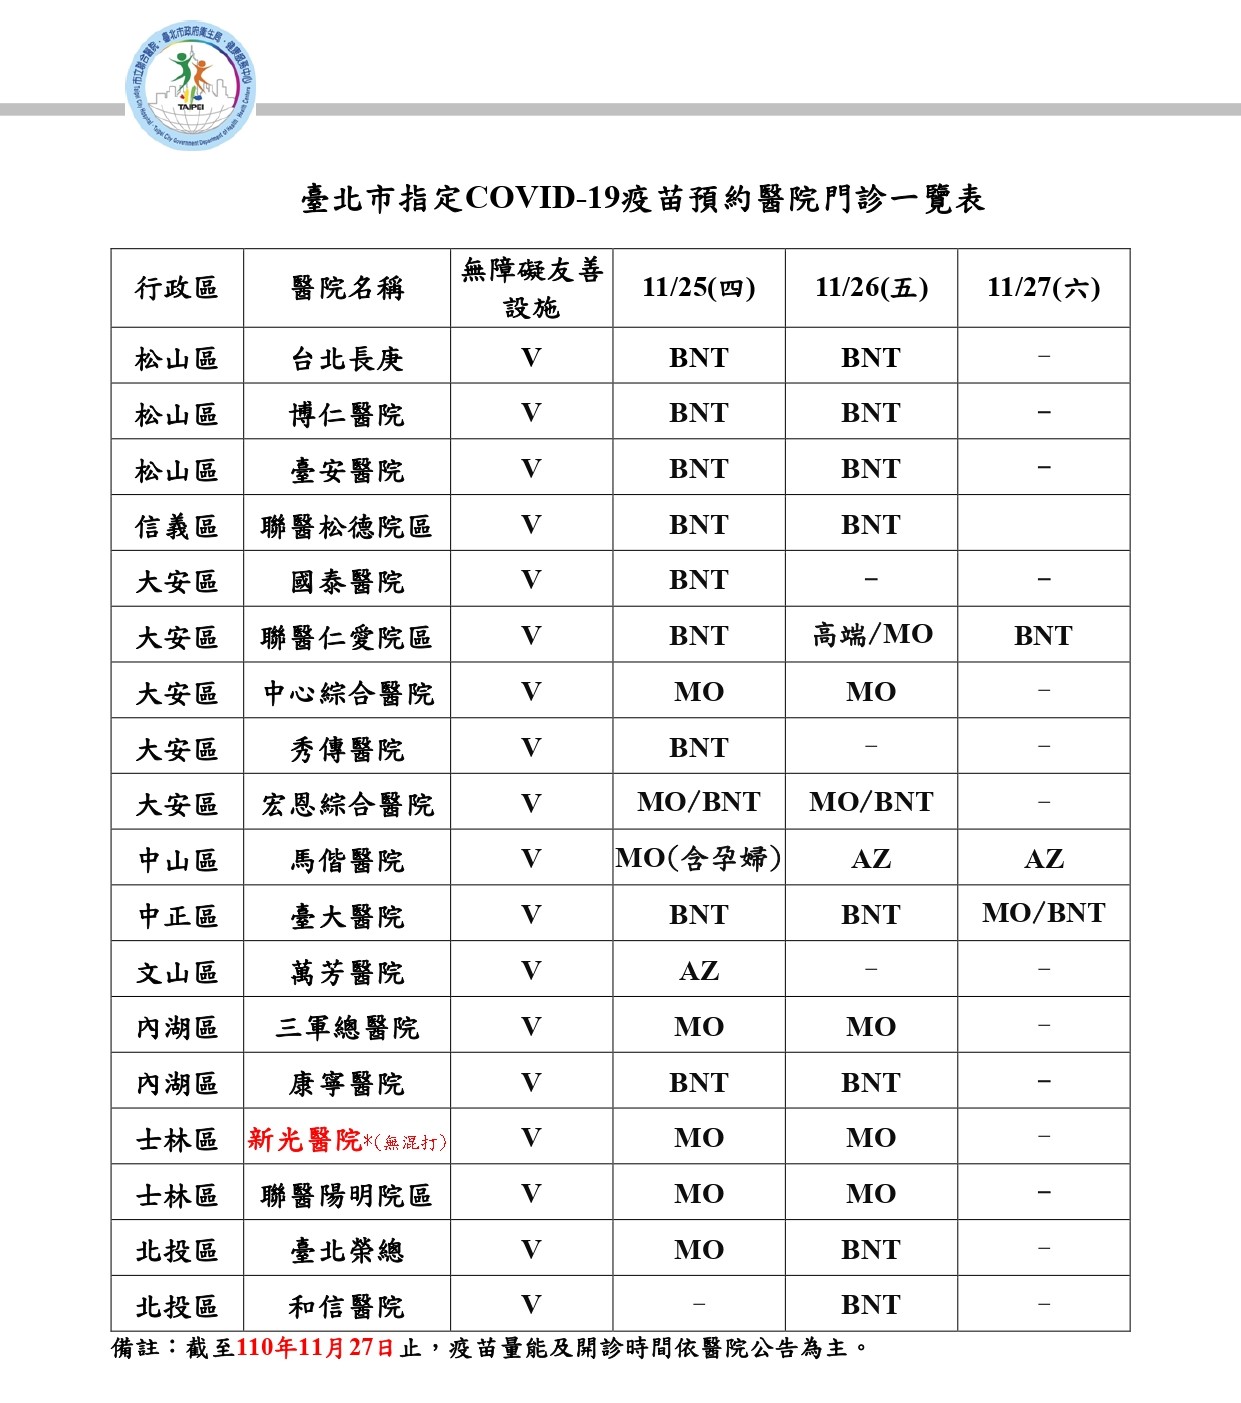 The list of designated clinics for COVID-19 vaccinations. The related services are available until November 27. (Photo / Provided by the Taipei City Government)